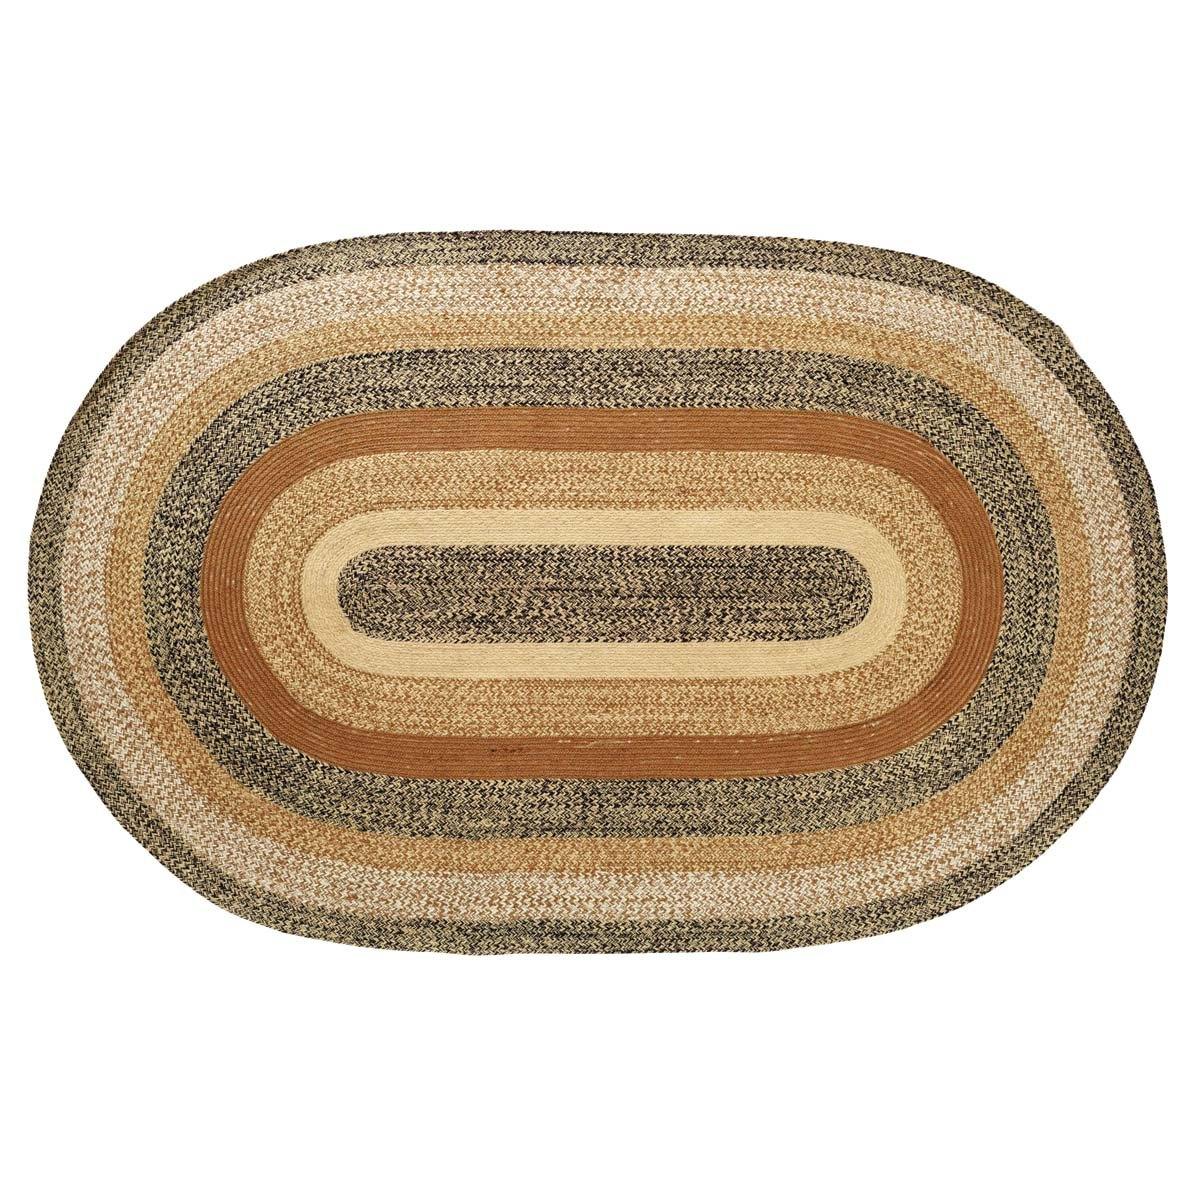 Kettle Grove Jute Braided Rug Oval 5'x8' with Rug Pad VHC Brands - The Fox Decor